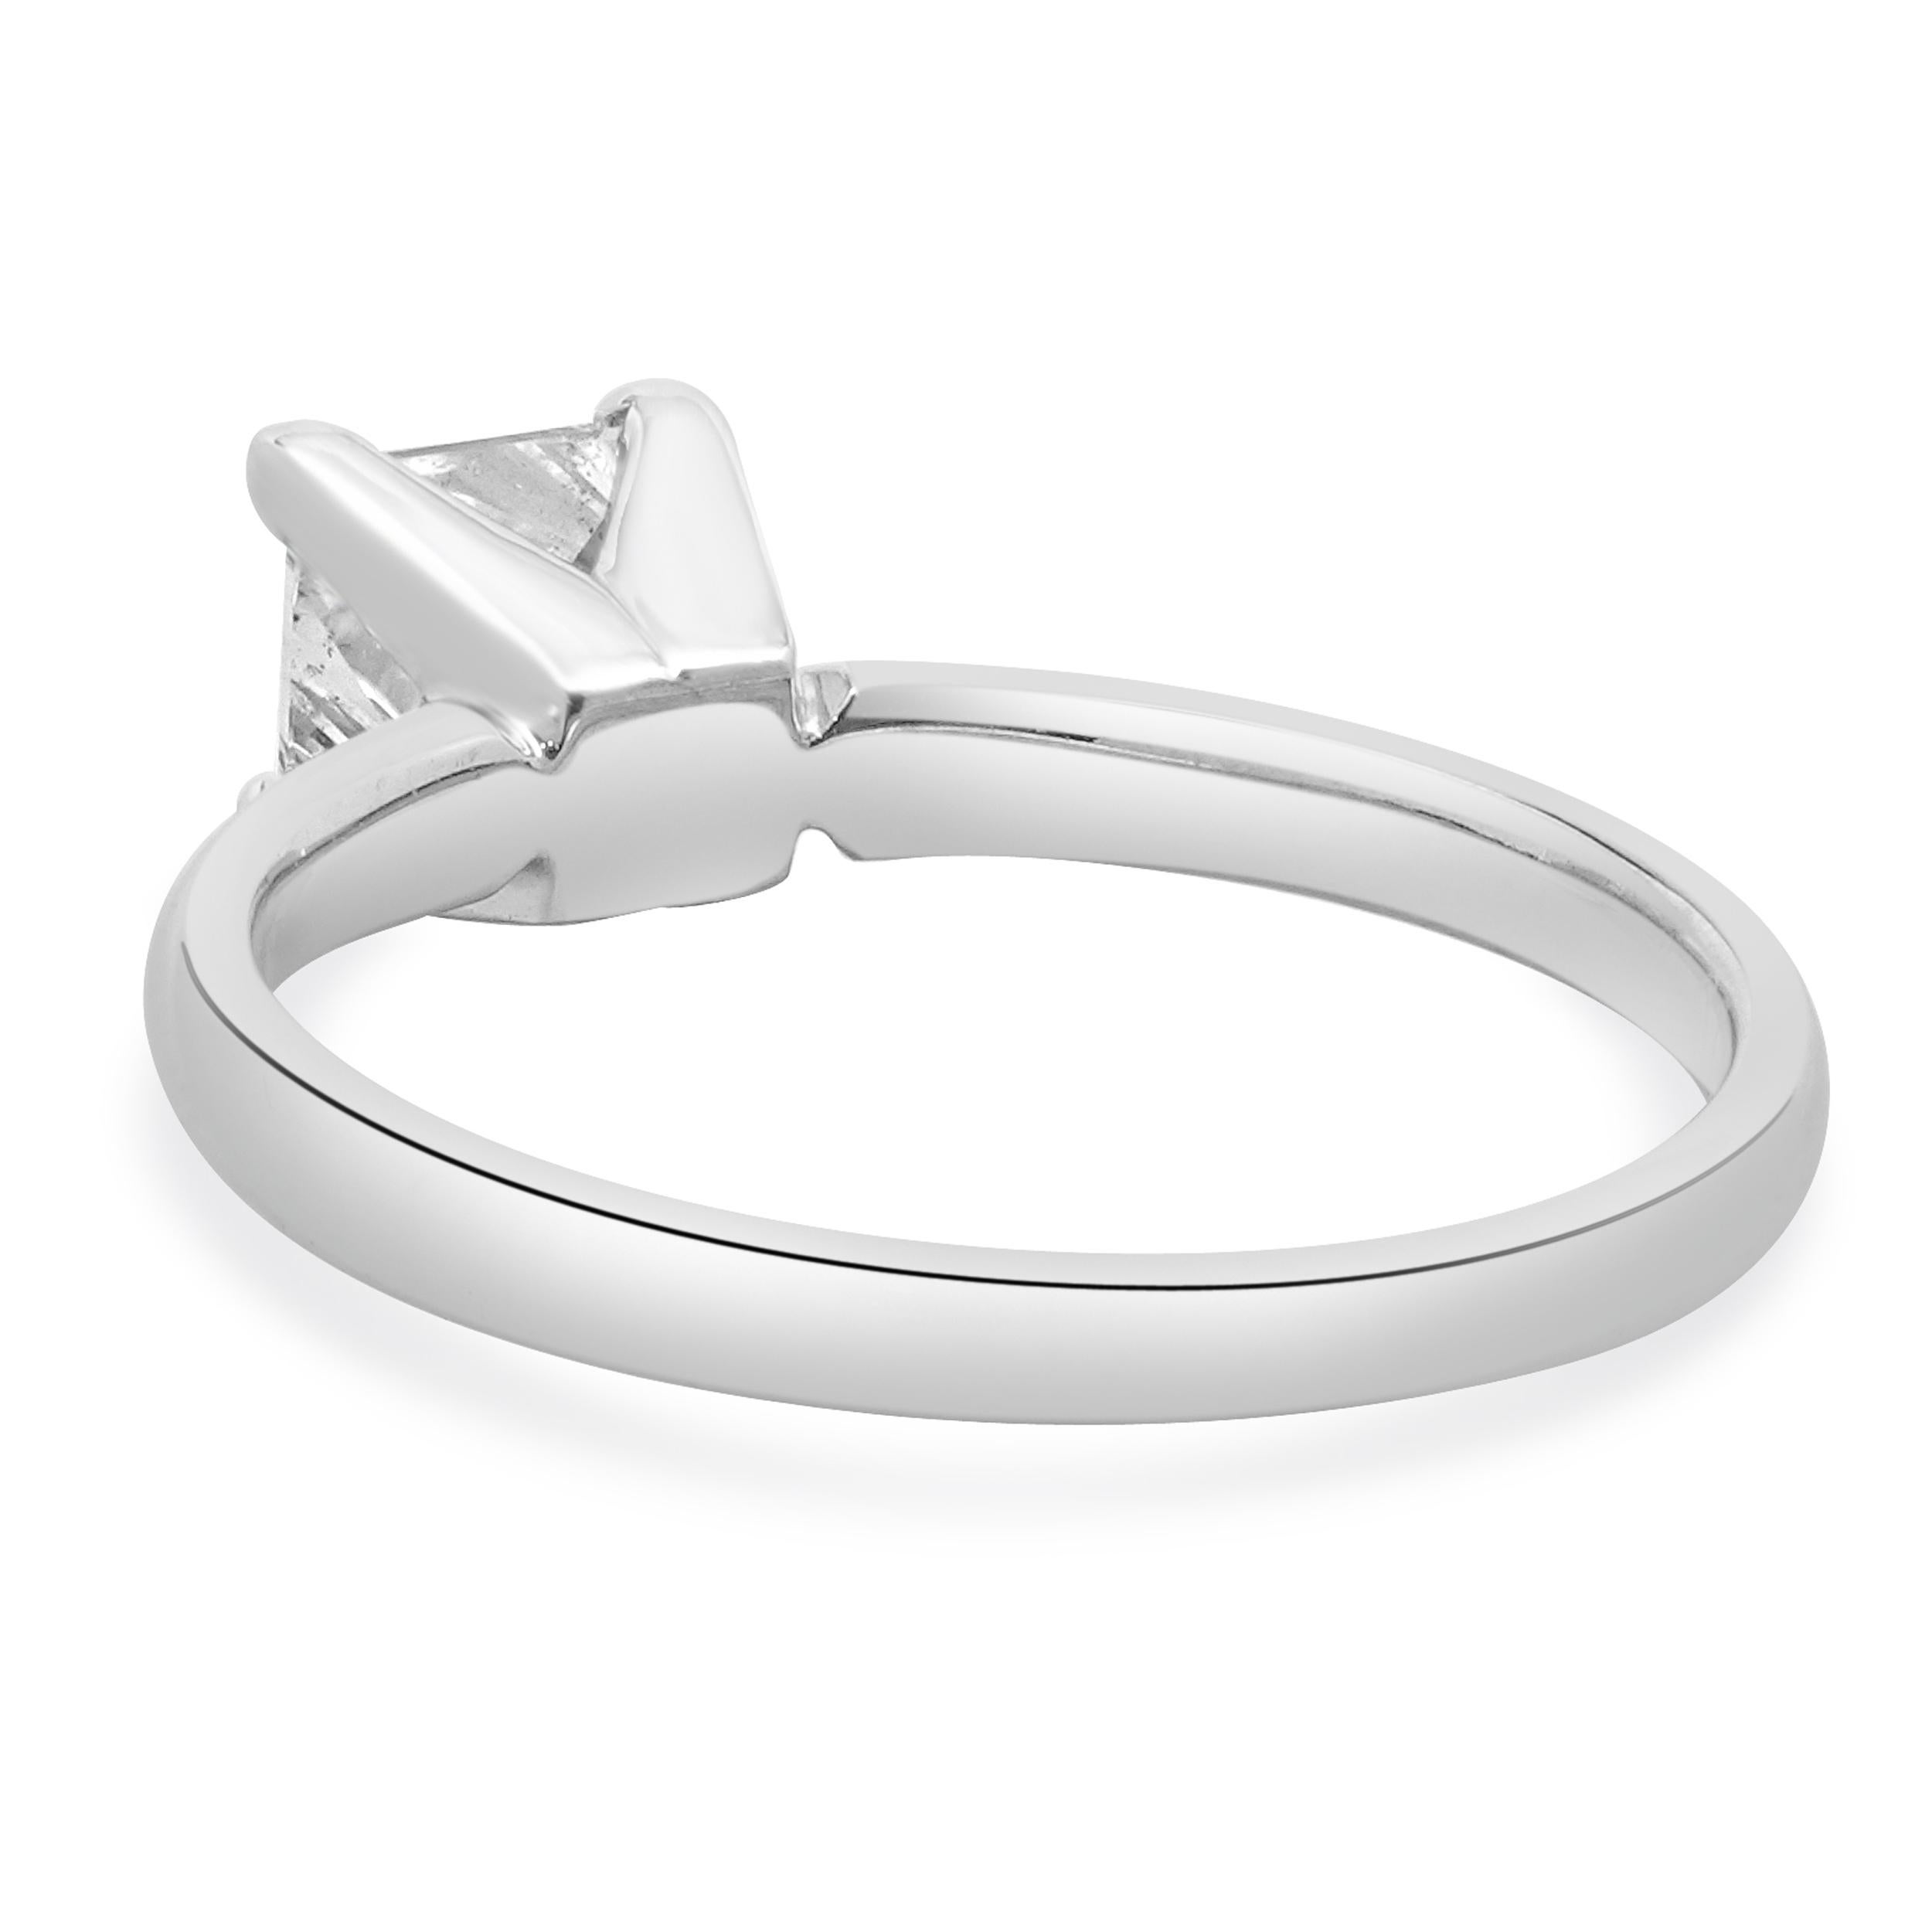 14 Karat White Gold Princess Cut Diamond Engagement Ring In Excellent Condition For Sale In Scottsdale, AZ